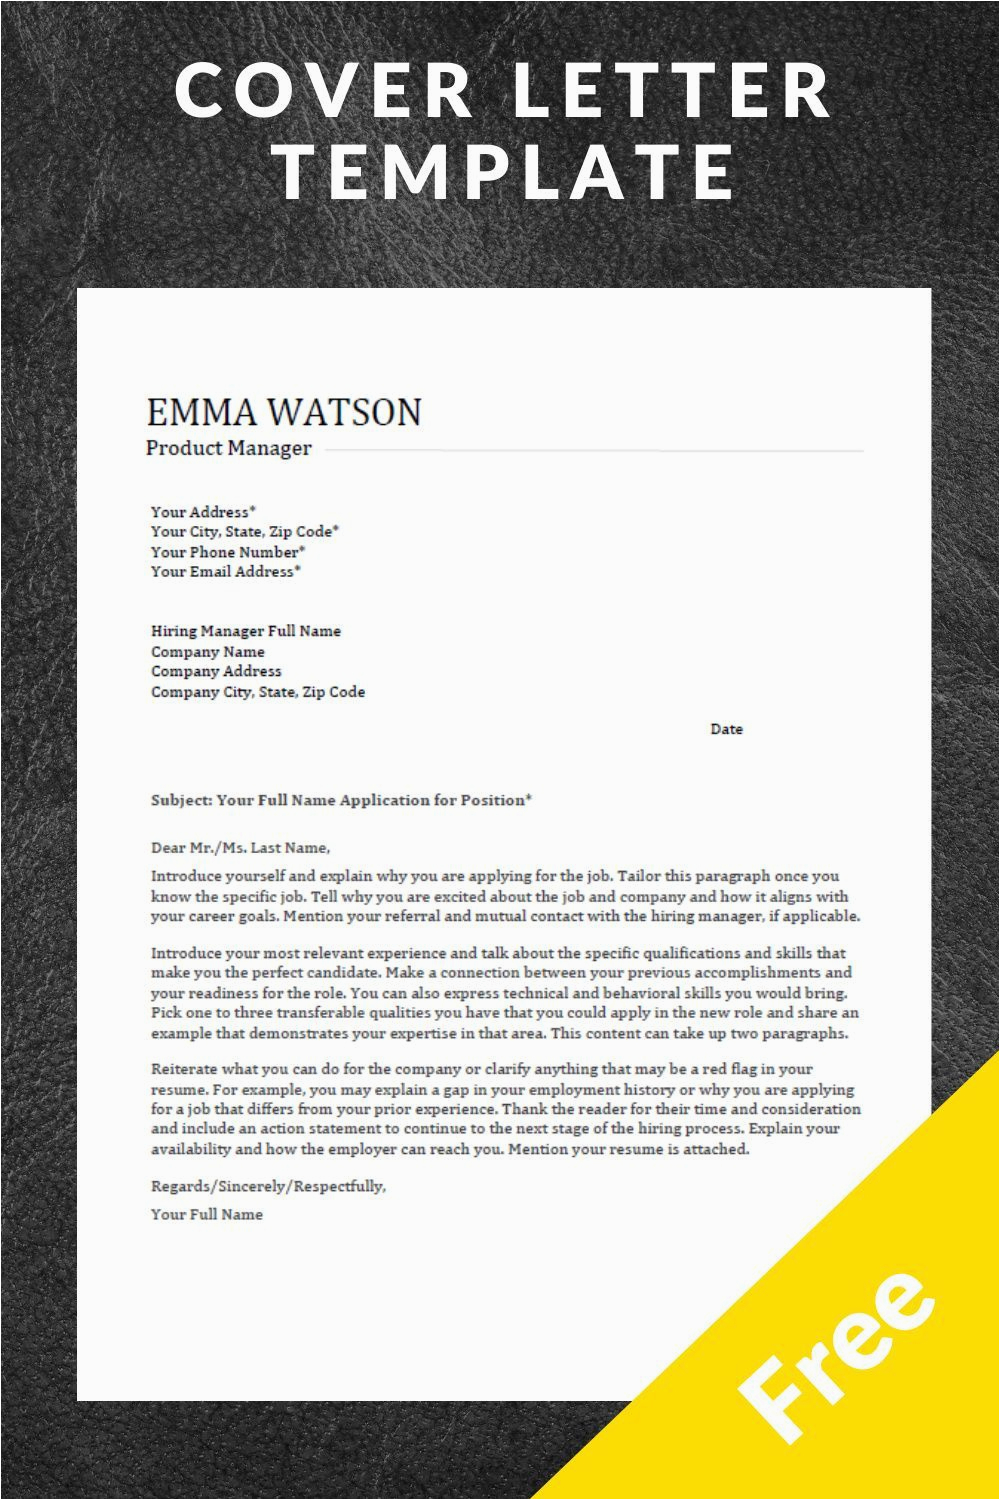 Free Simple Resume Cover Letter Template Cover Letter Template Download for Free In 2020